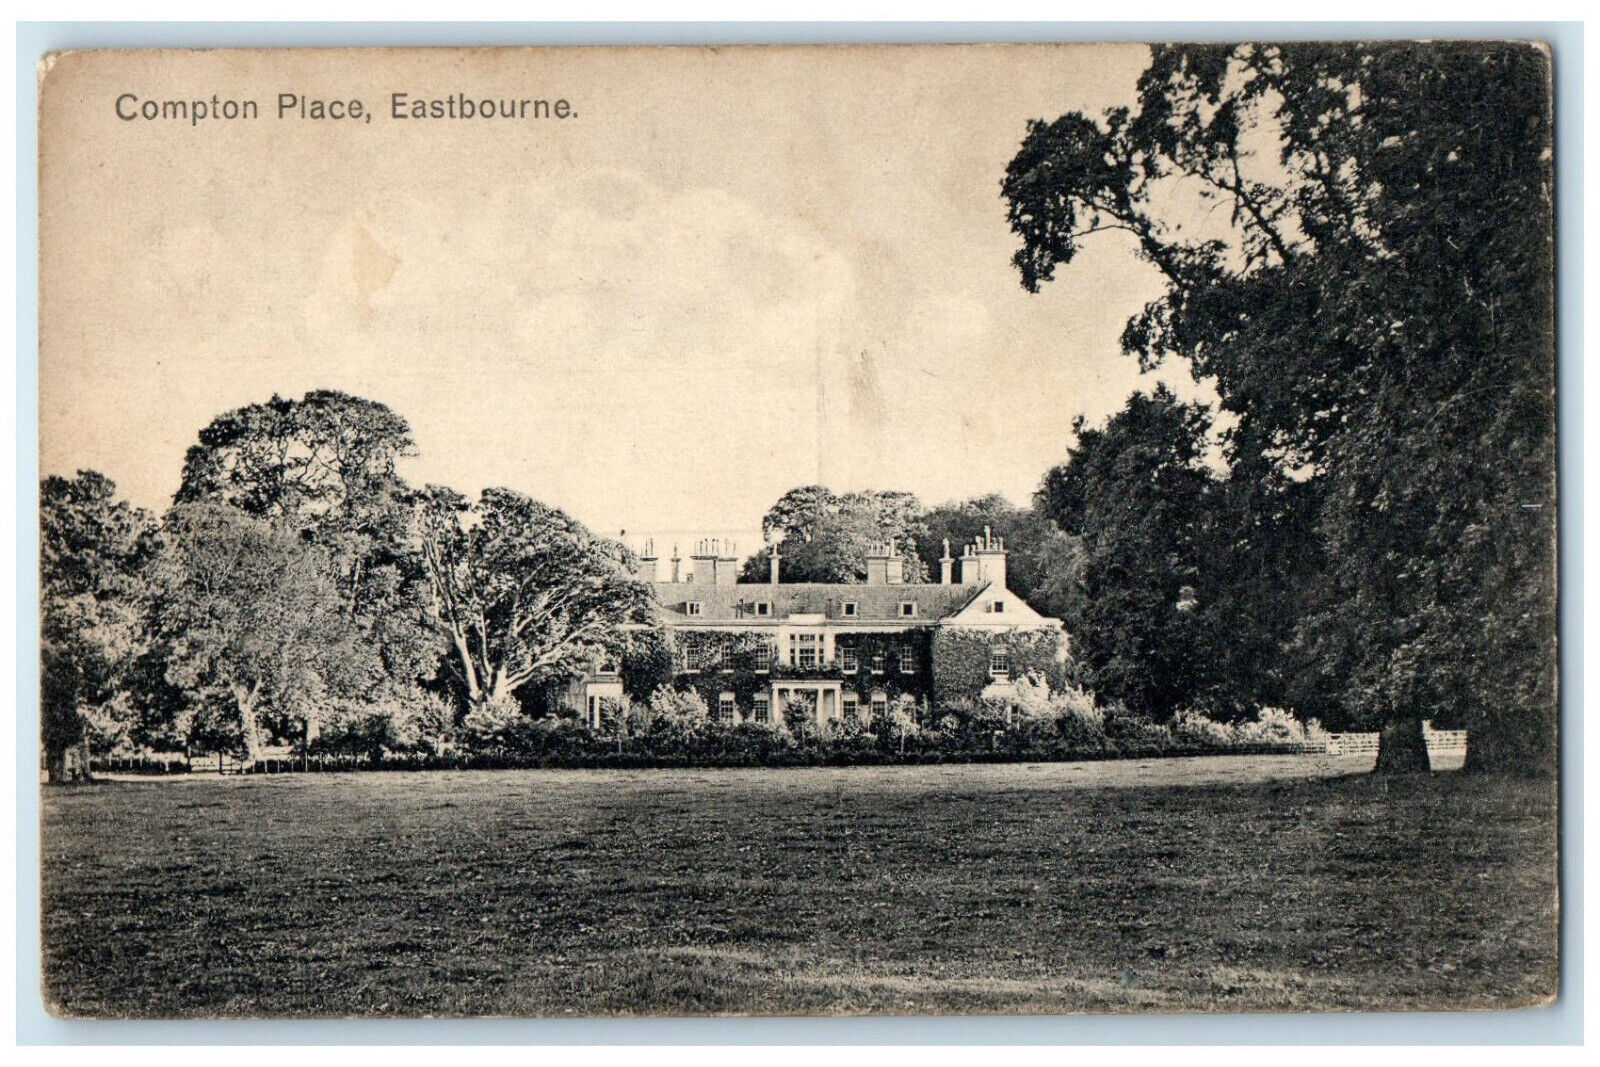 c1910 Scene at Compton Place Eastbourne England Antique Unposted Postcard